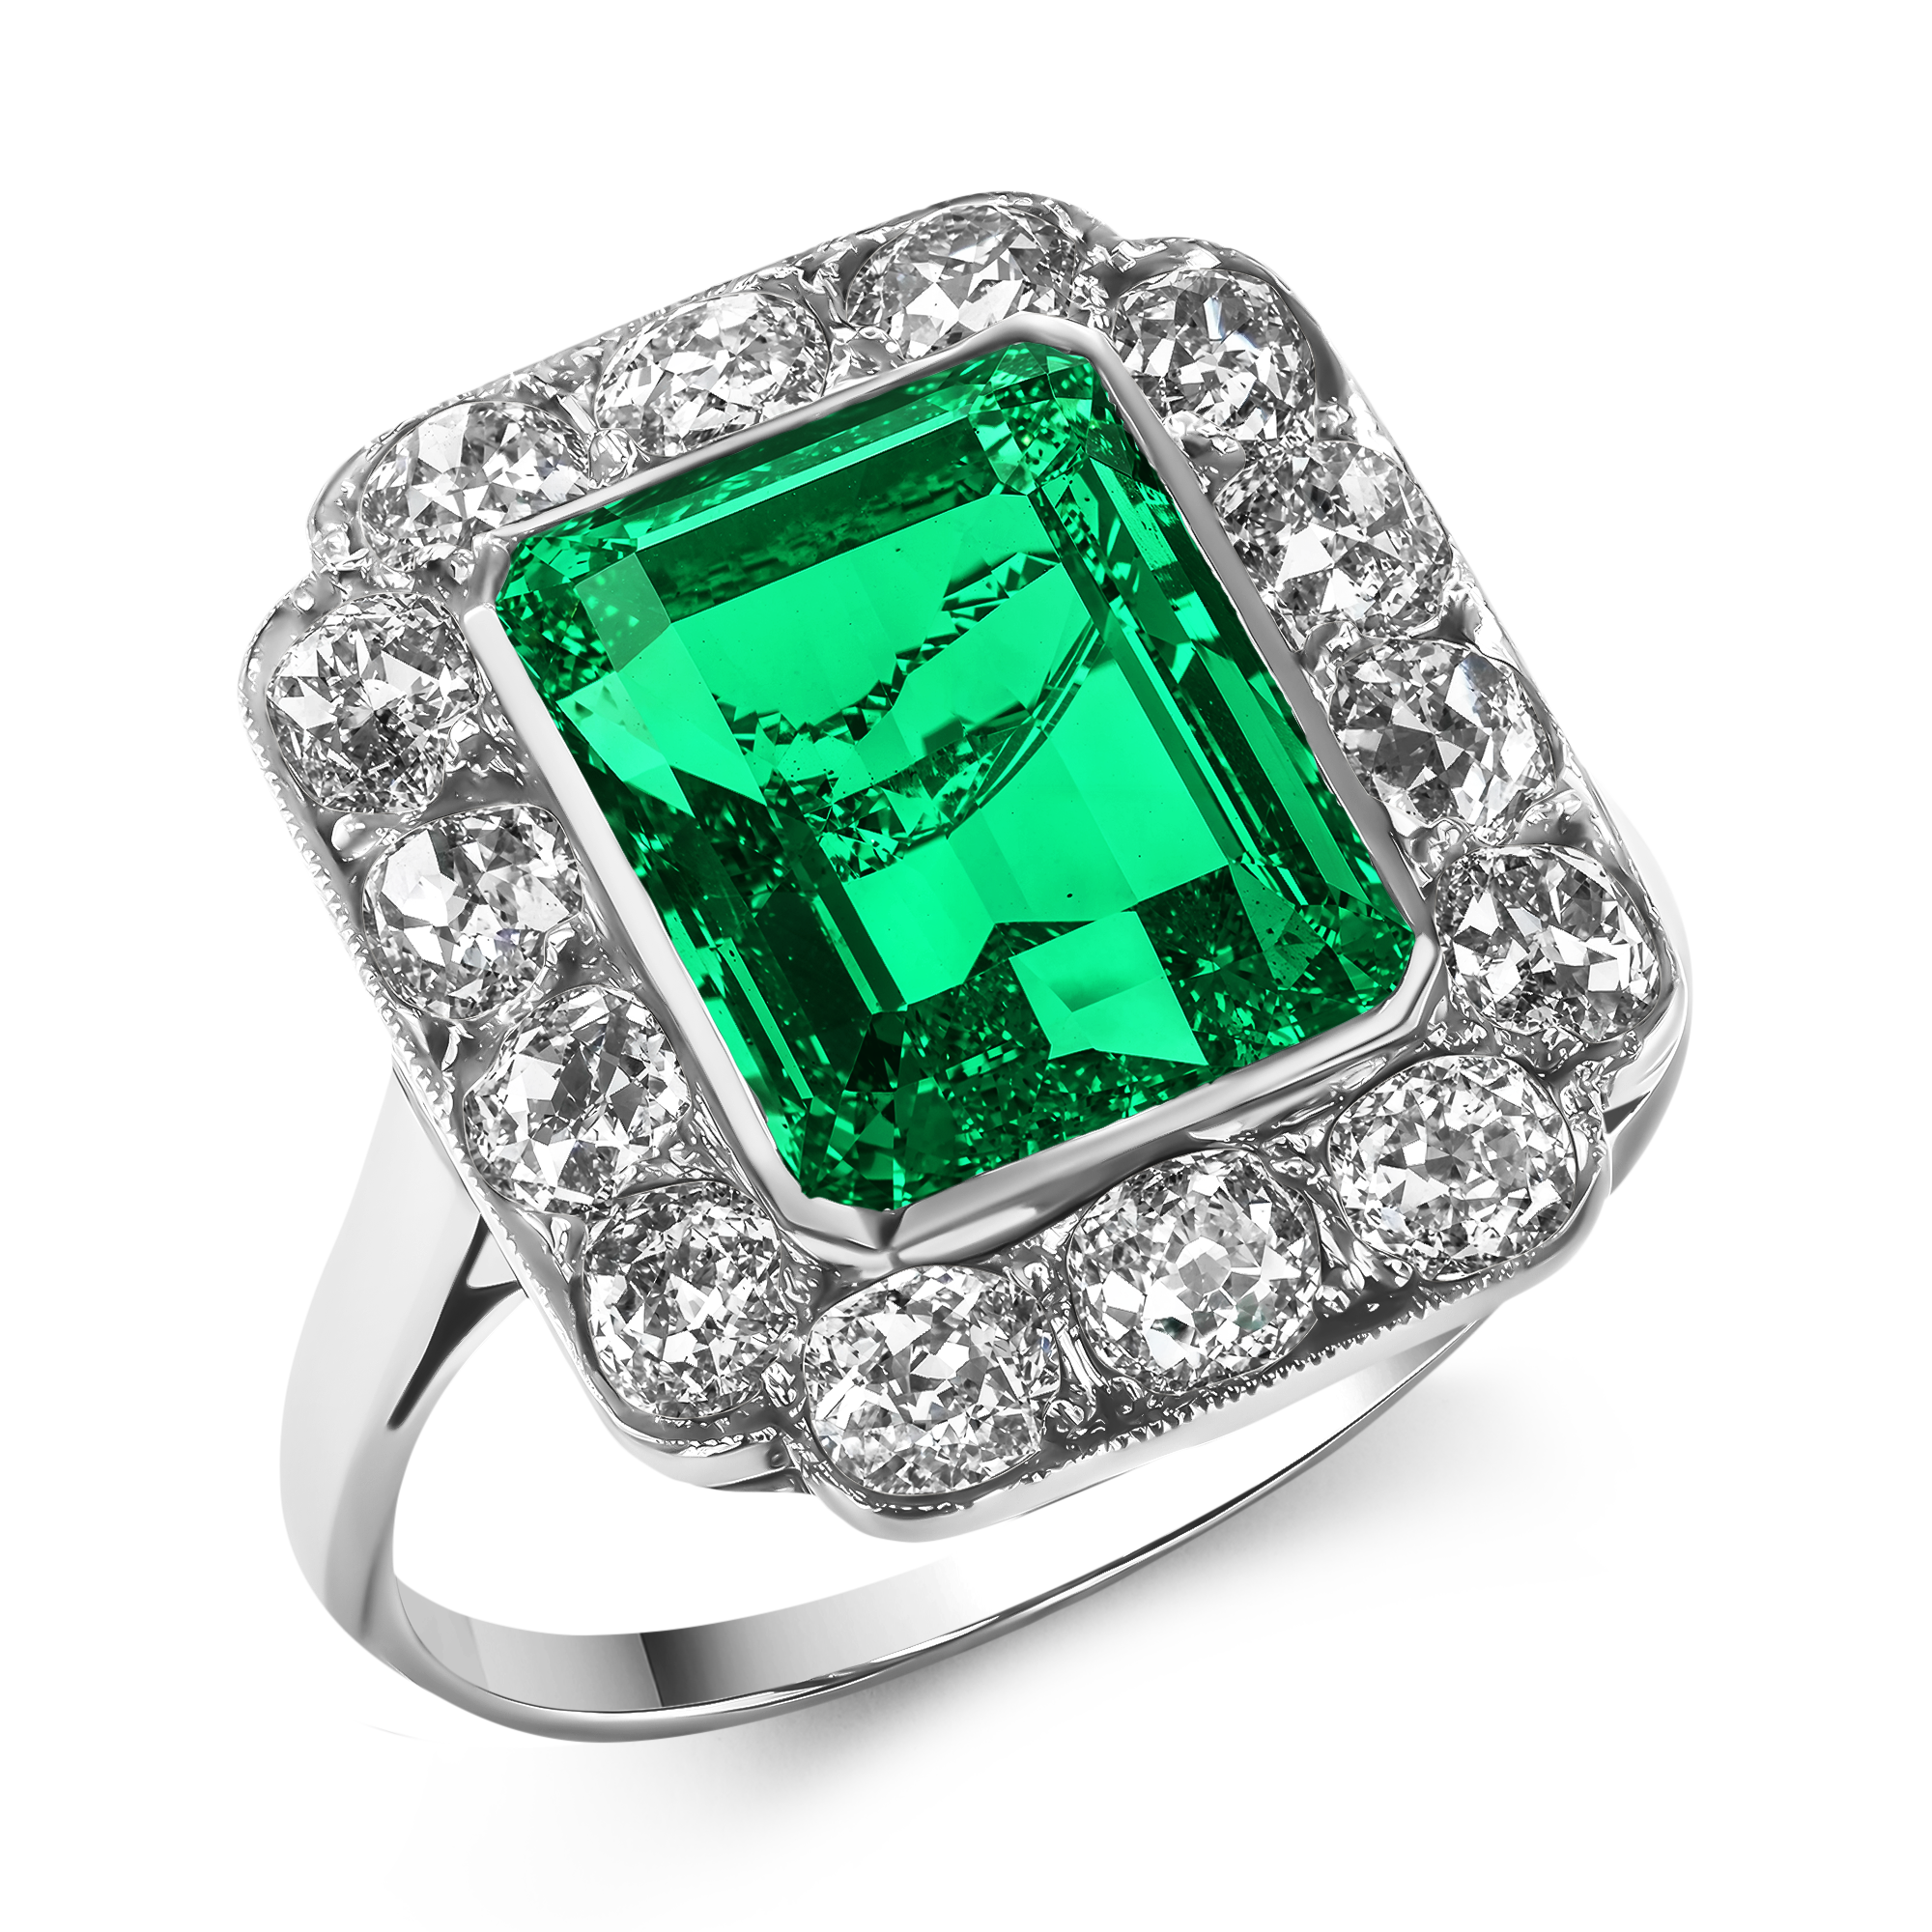 Edwardian 3.41ct Emerald and Diamond Cluster Ring Emerald Cut, Rubover Set_1